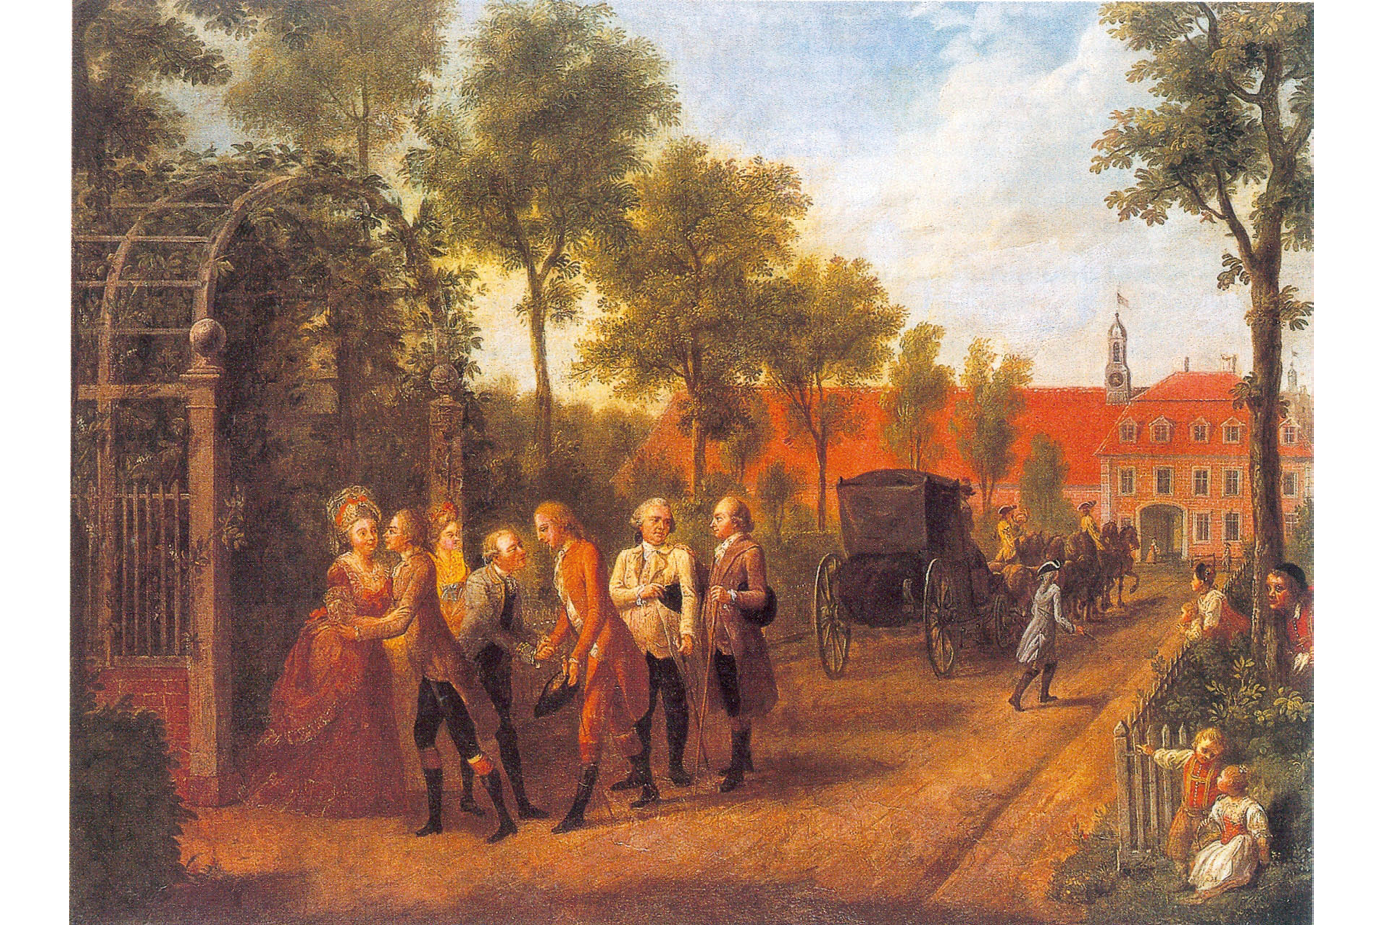 An oil painting: a well-dressed noble family greets sons at the entrance of their estate, while a carriage drawn by six horses heads towards the exit; on the right side, from a fence, a servant woman holding her child looks at the carriage, a man looks at the family from behind a tree, and two small children look at the family, one points at them while the other one looks in the pointed direction.